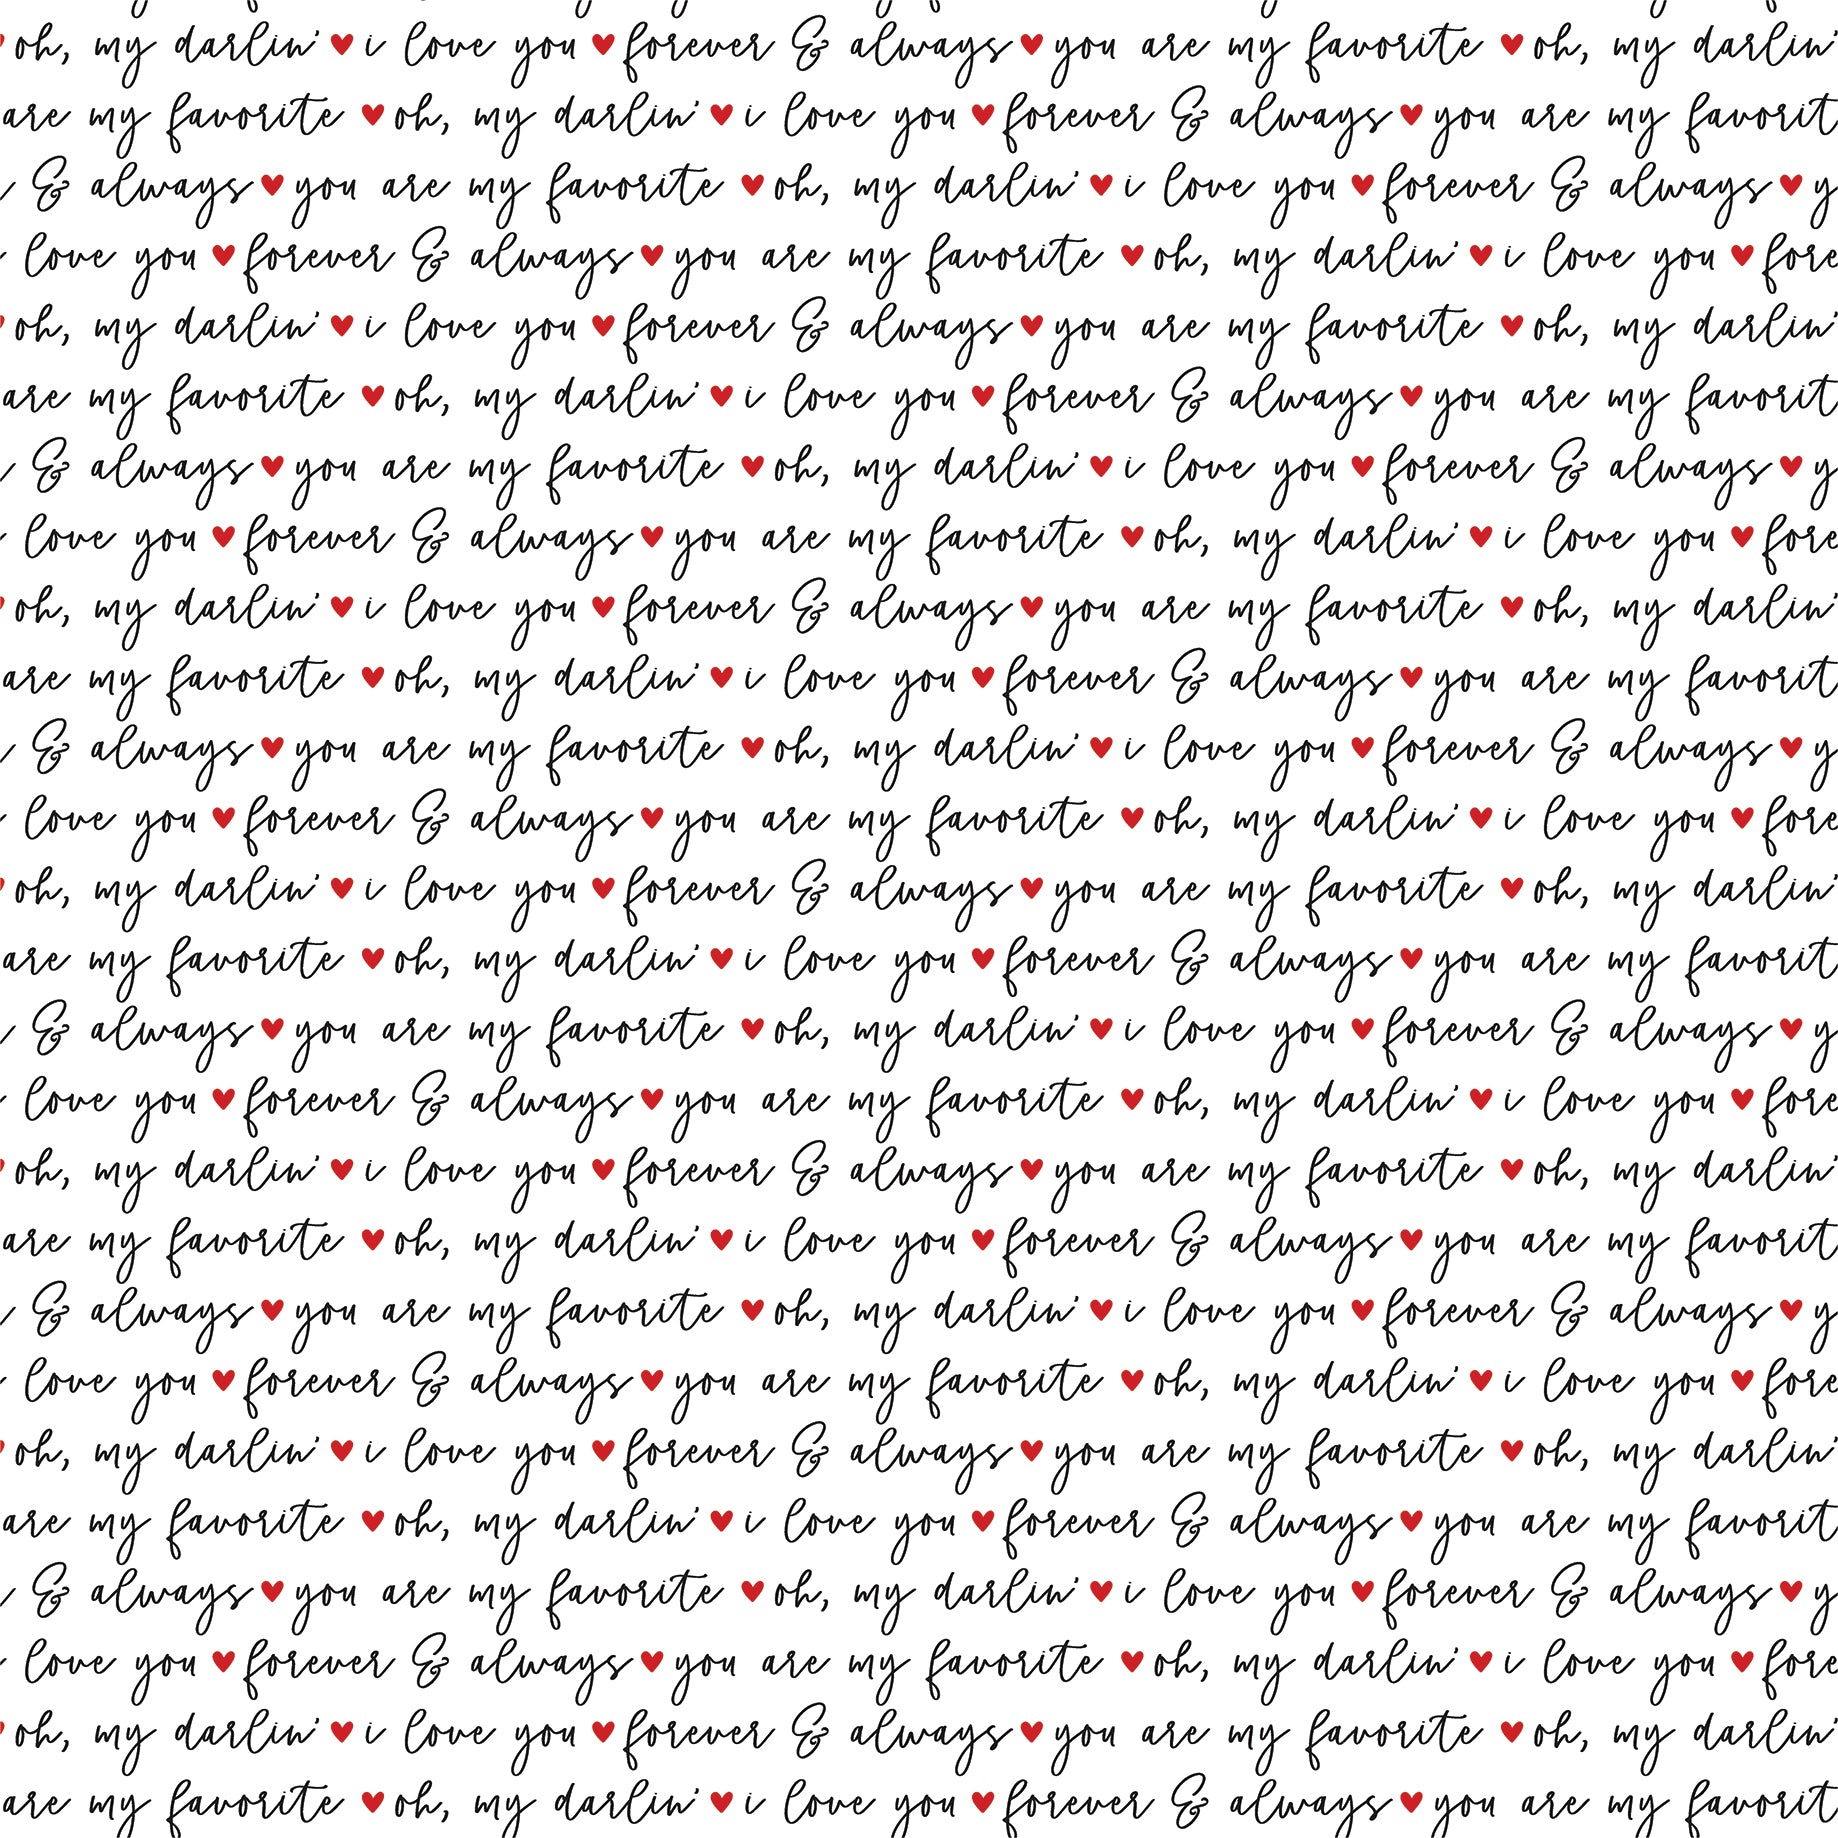 Love Notes Collection Oh My Darlin' 12 x 12 Double-Sided Scrapbook Paper by Echo Park Paper